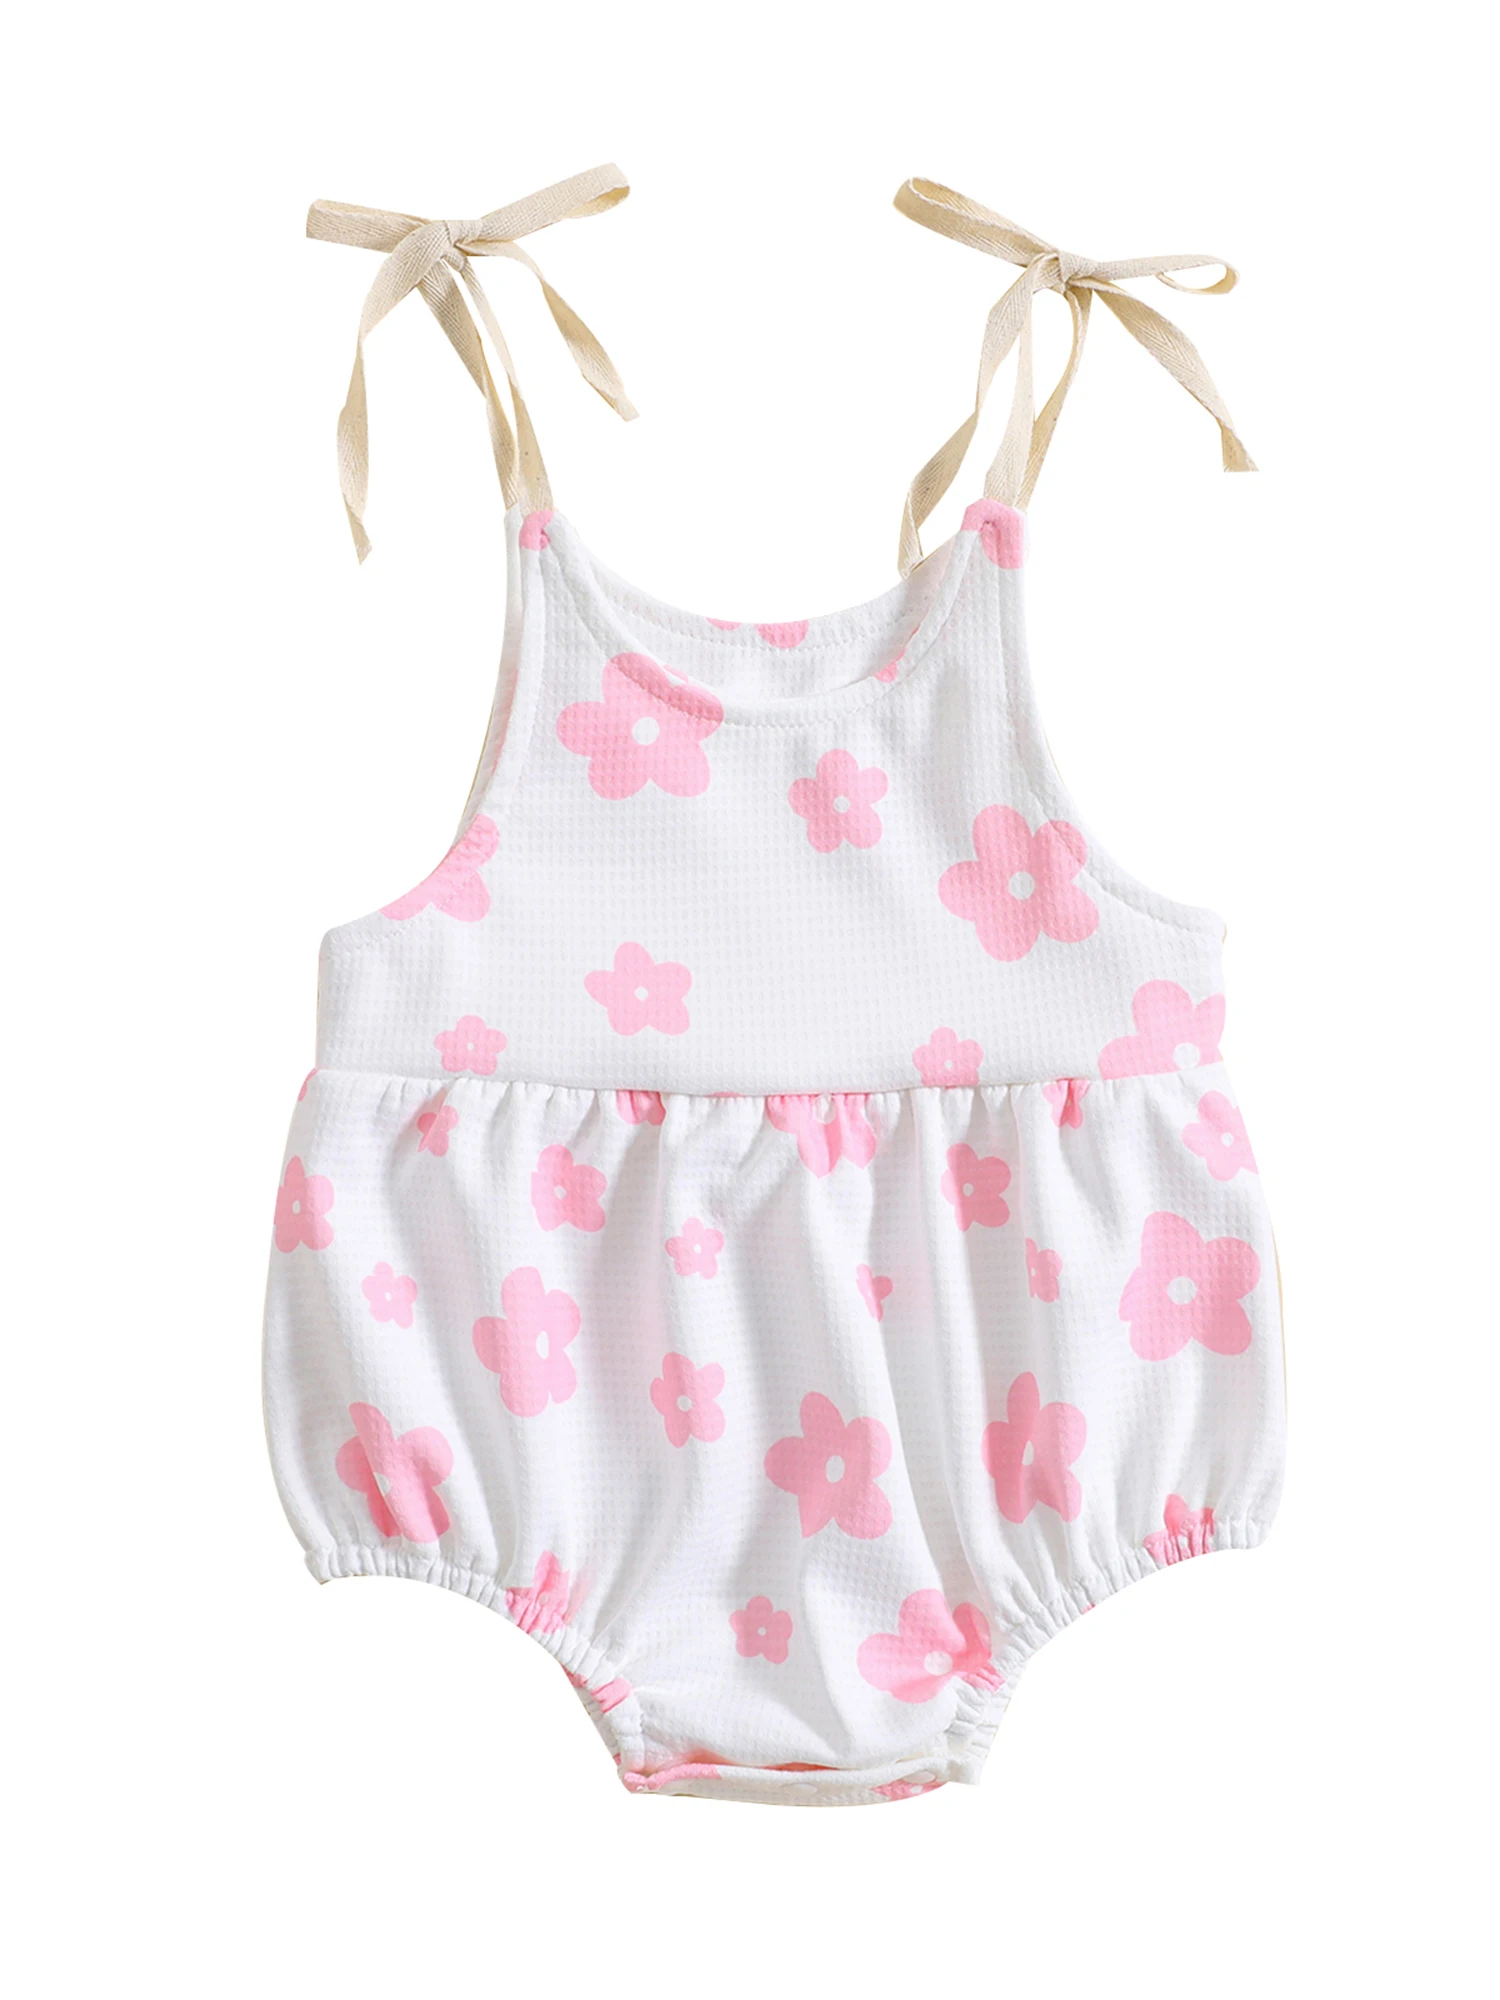 

Kupretty Newborn Baby Girl Summer Clothes Sleeveless Strap Daisy Romper Bodysuit Jumpsuit Playsuits Cute Boho Outfit